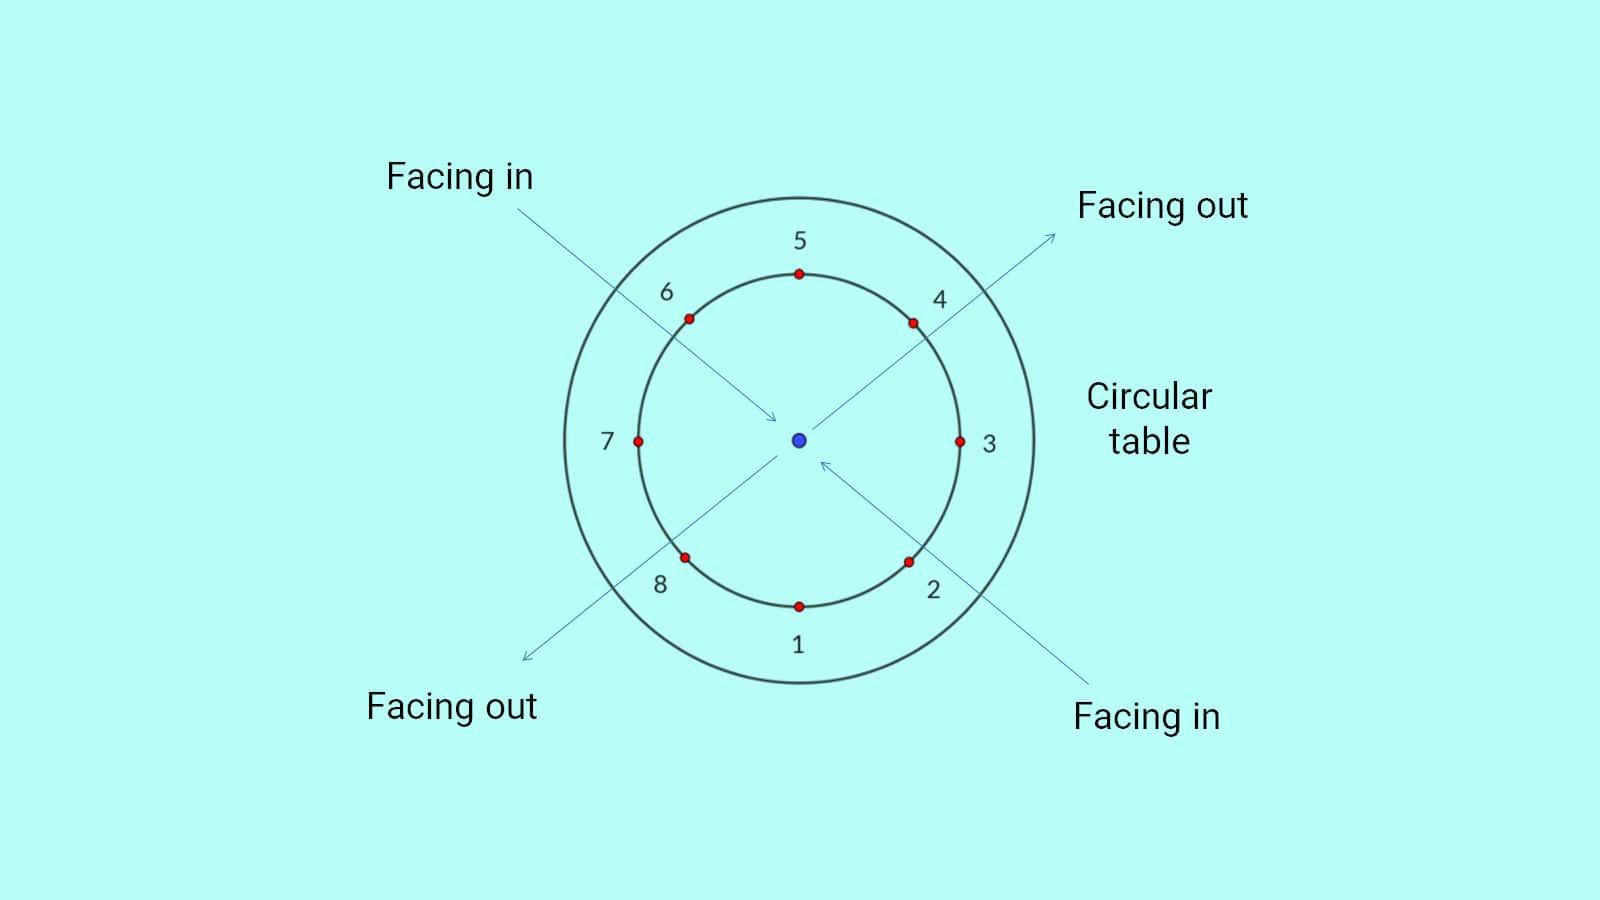 Circular Seating Arrangement Reasoning Puzzle for SBI PO 7 solved in easy steps